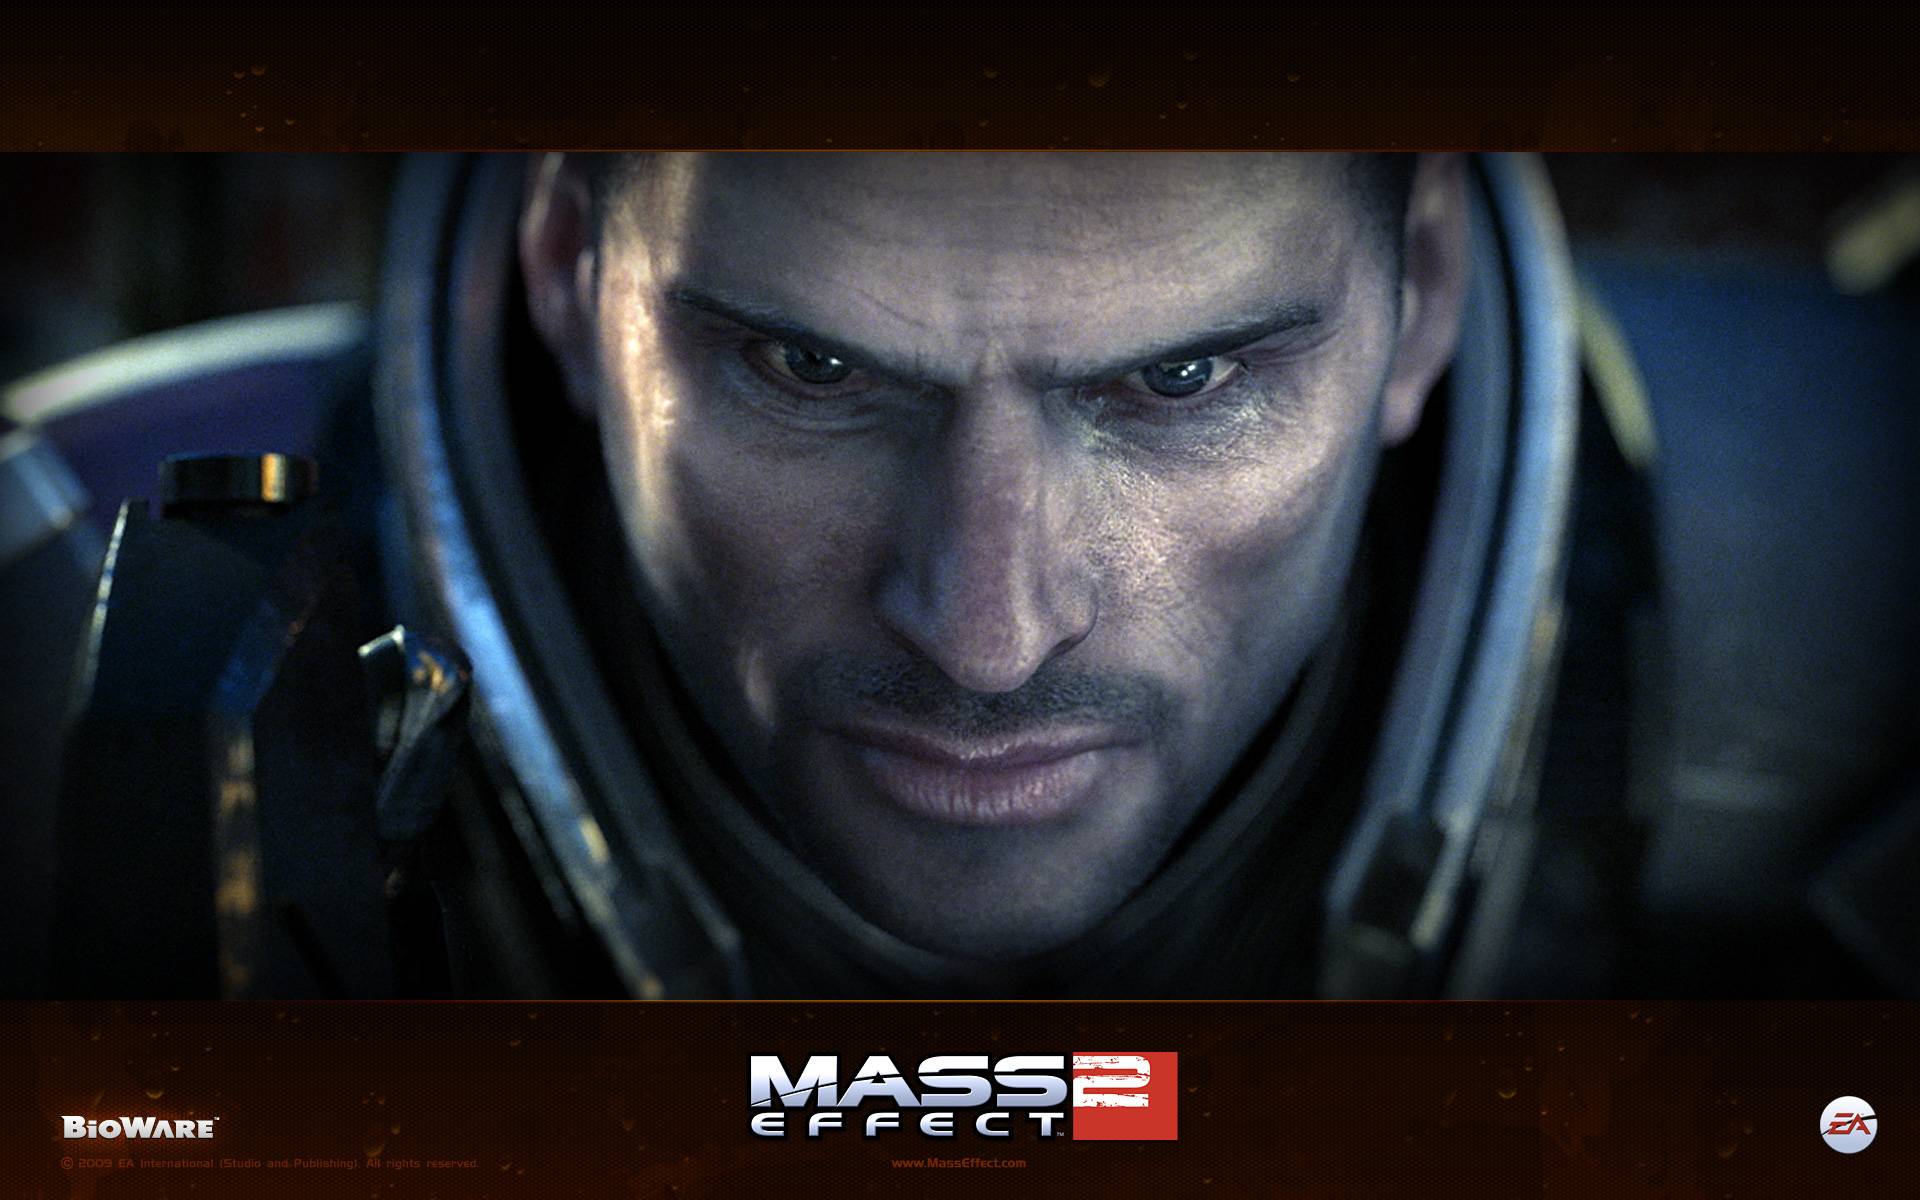 Mass Effect Ps3 Wallpaper In HD Gamingbolt Video Game News